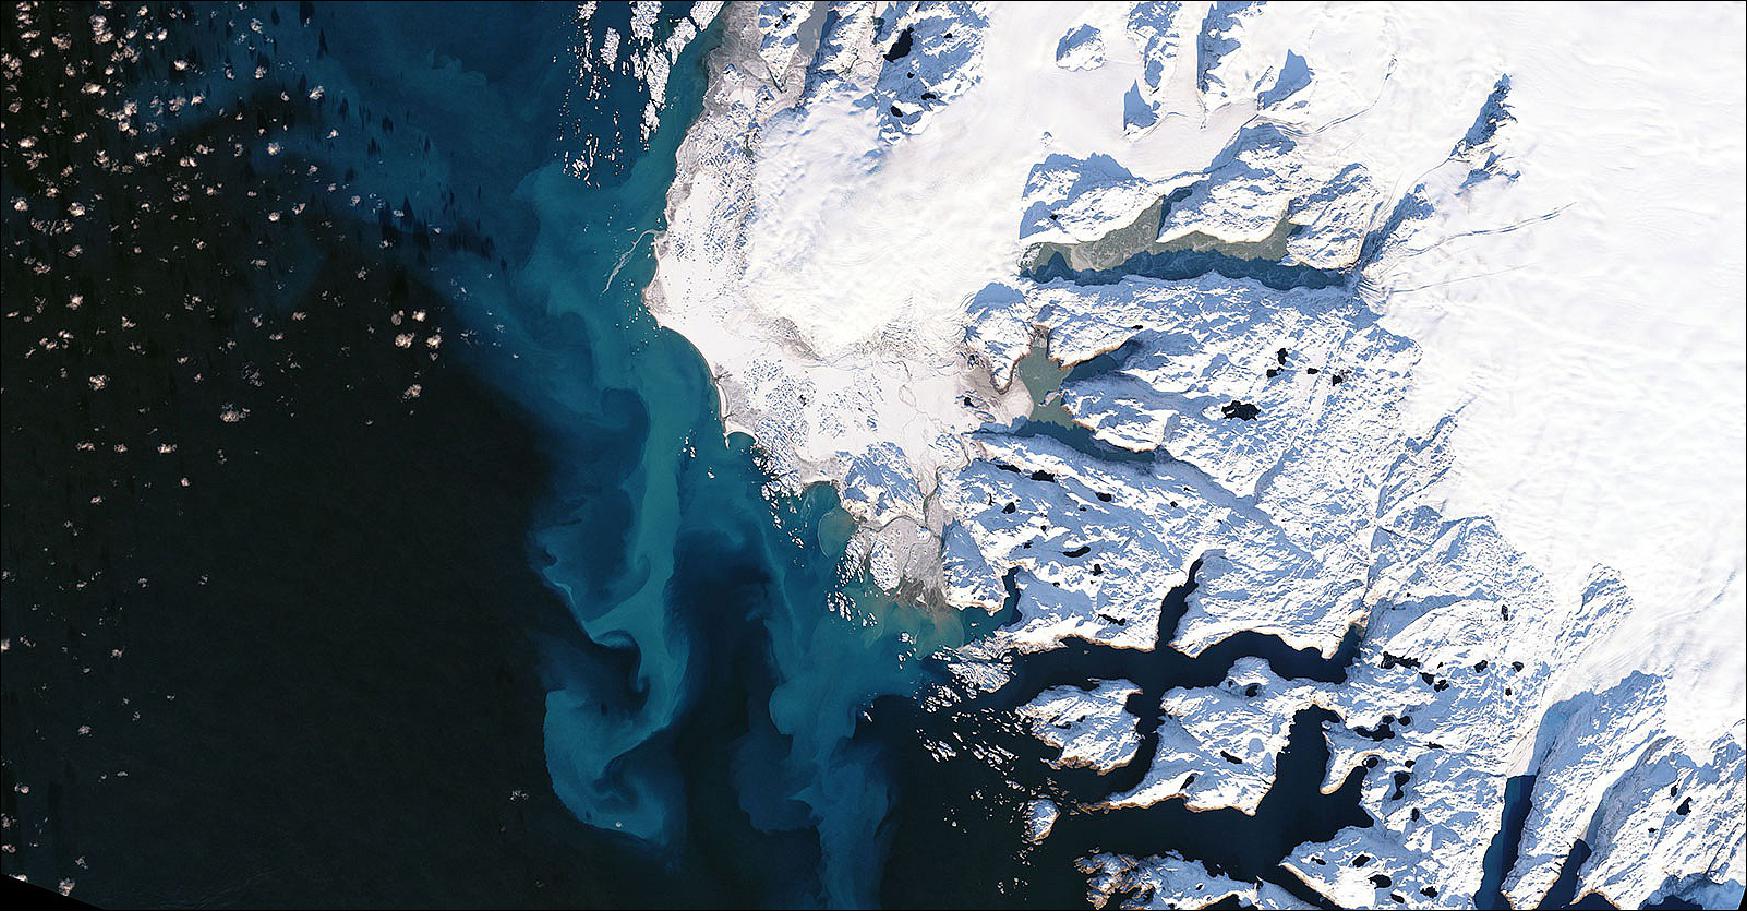 Figure 15: Meltwater from Greenland glaciers like the one pictured can contribute significantly to sea level rise. Sentinel-6 Michael Freilich monitors the height of Earth's oceans so that researchers can better understand the amount and rate of sea level rise (image credit: NASA Earth Observatory using Landsat data from USGS)